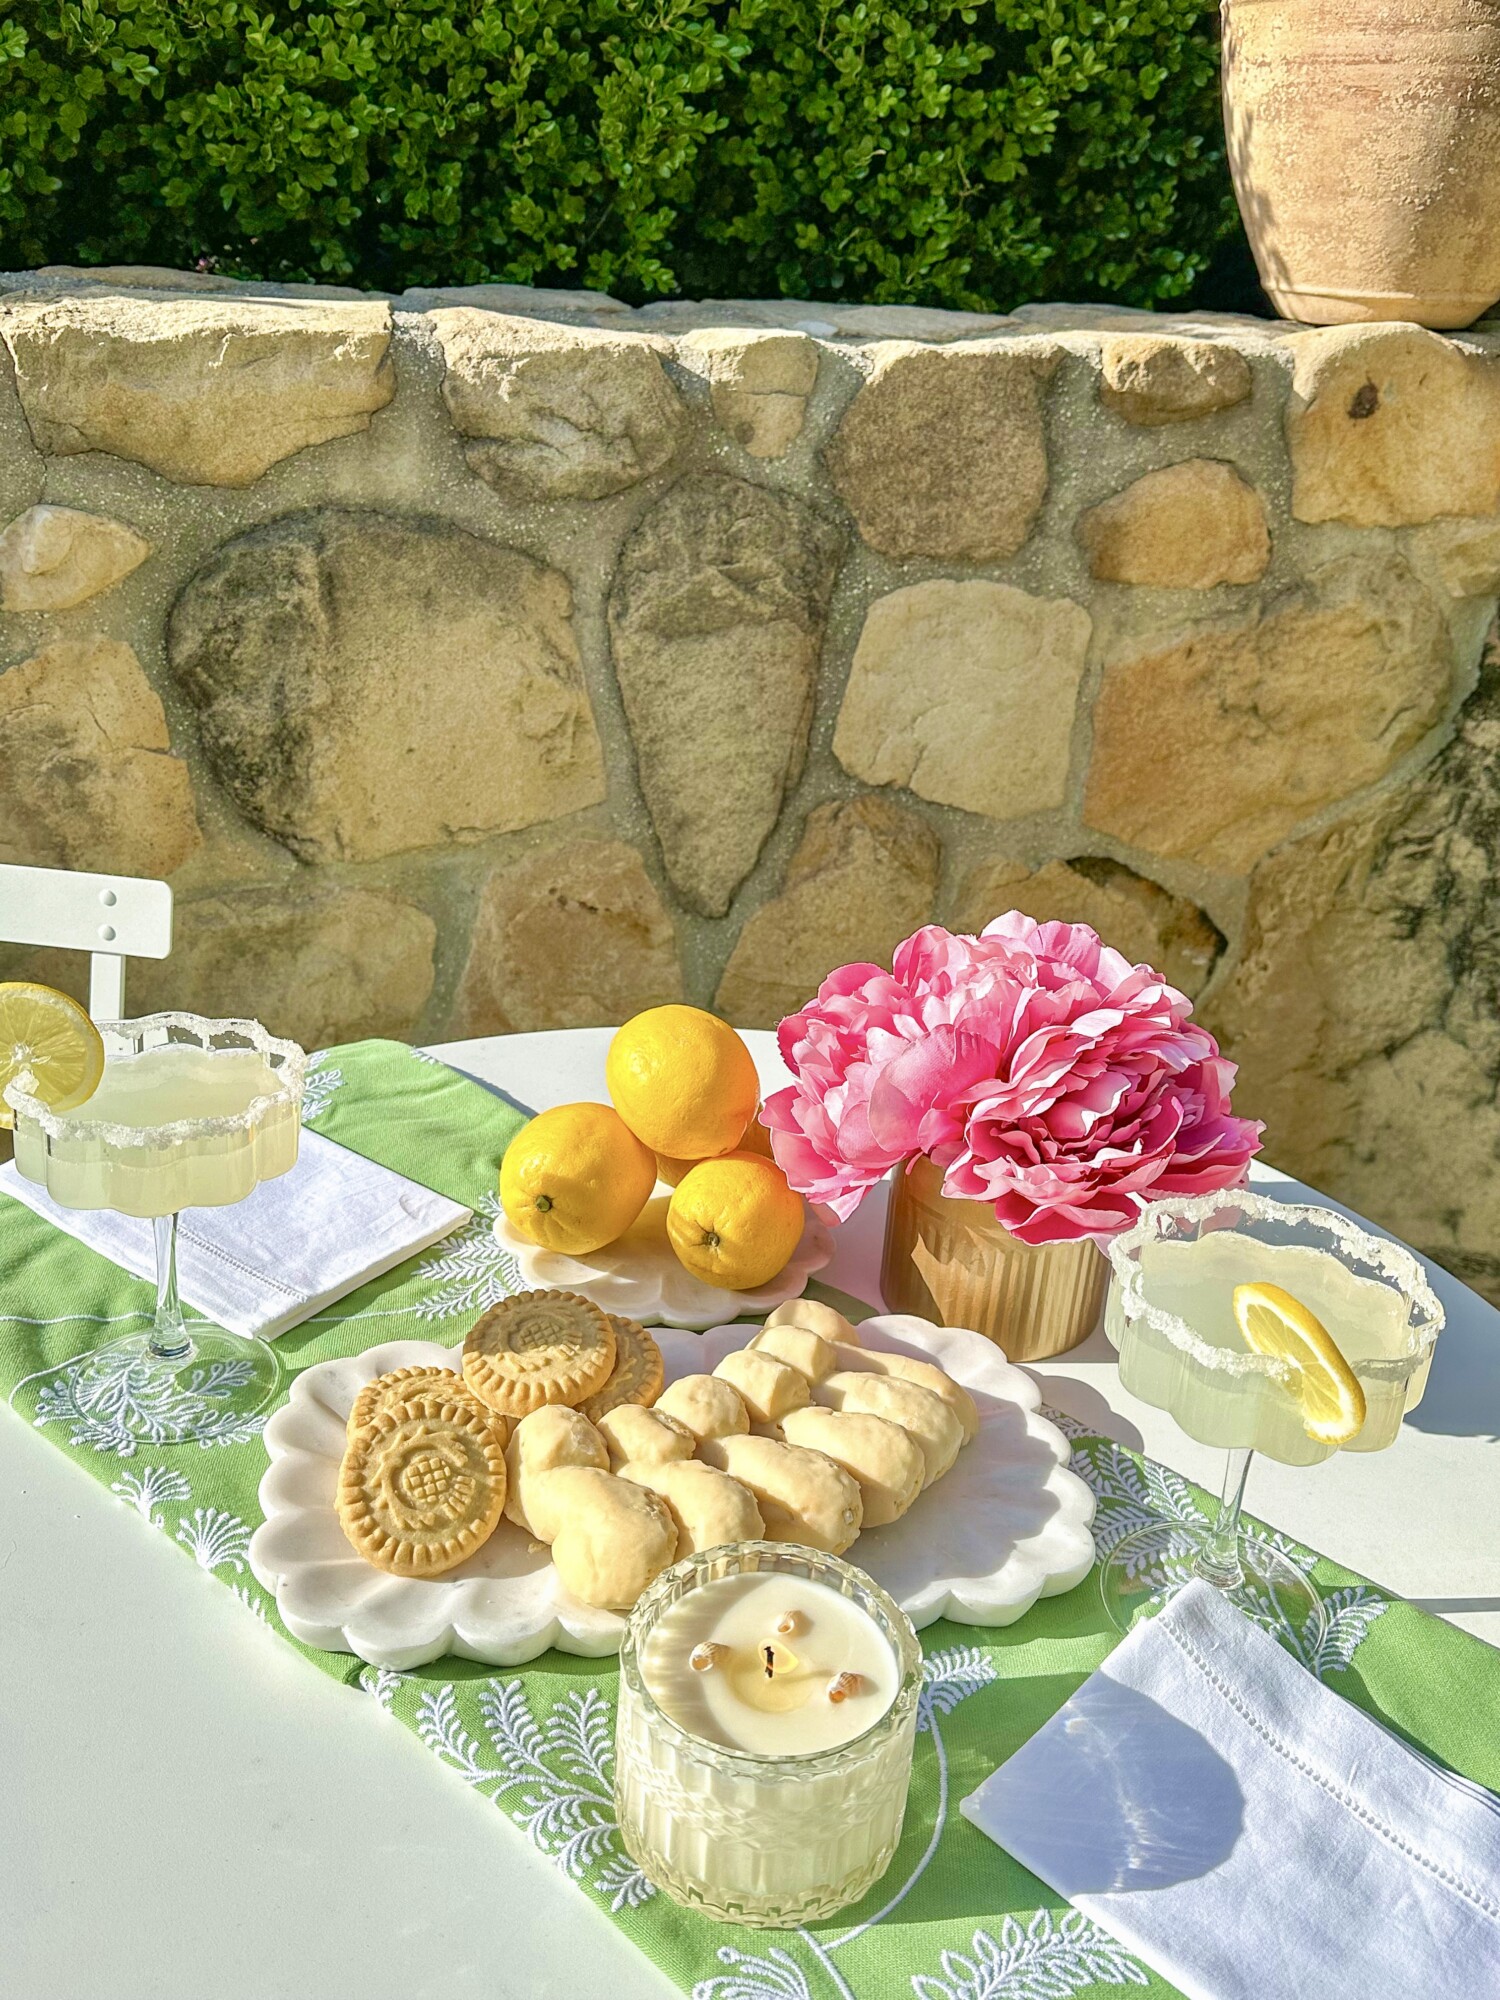 Up-close of drink setup with two lemon drops, candle, green tablecloth